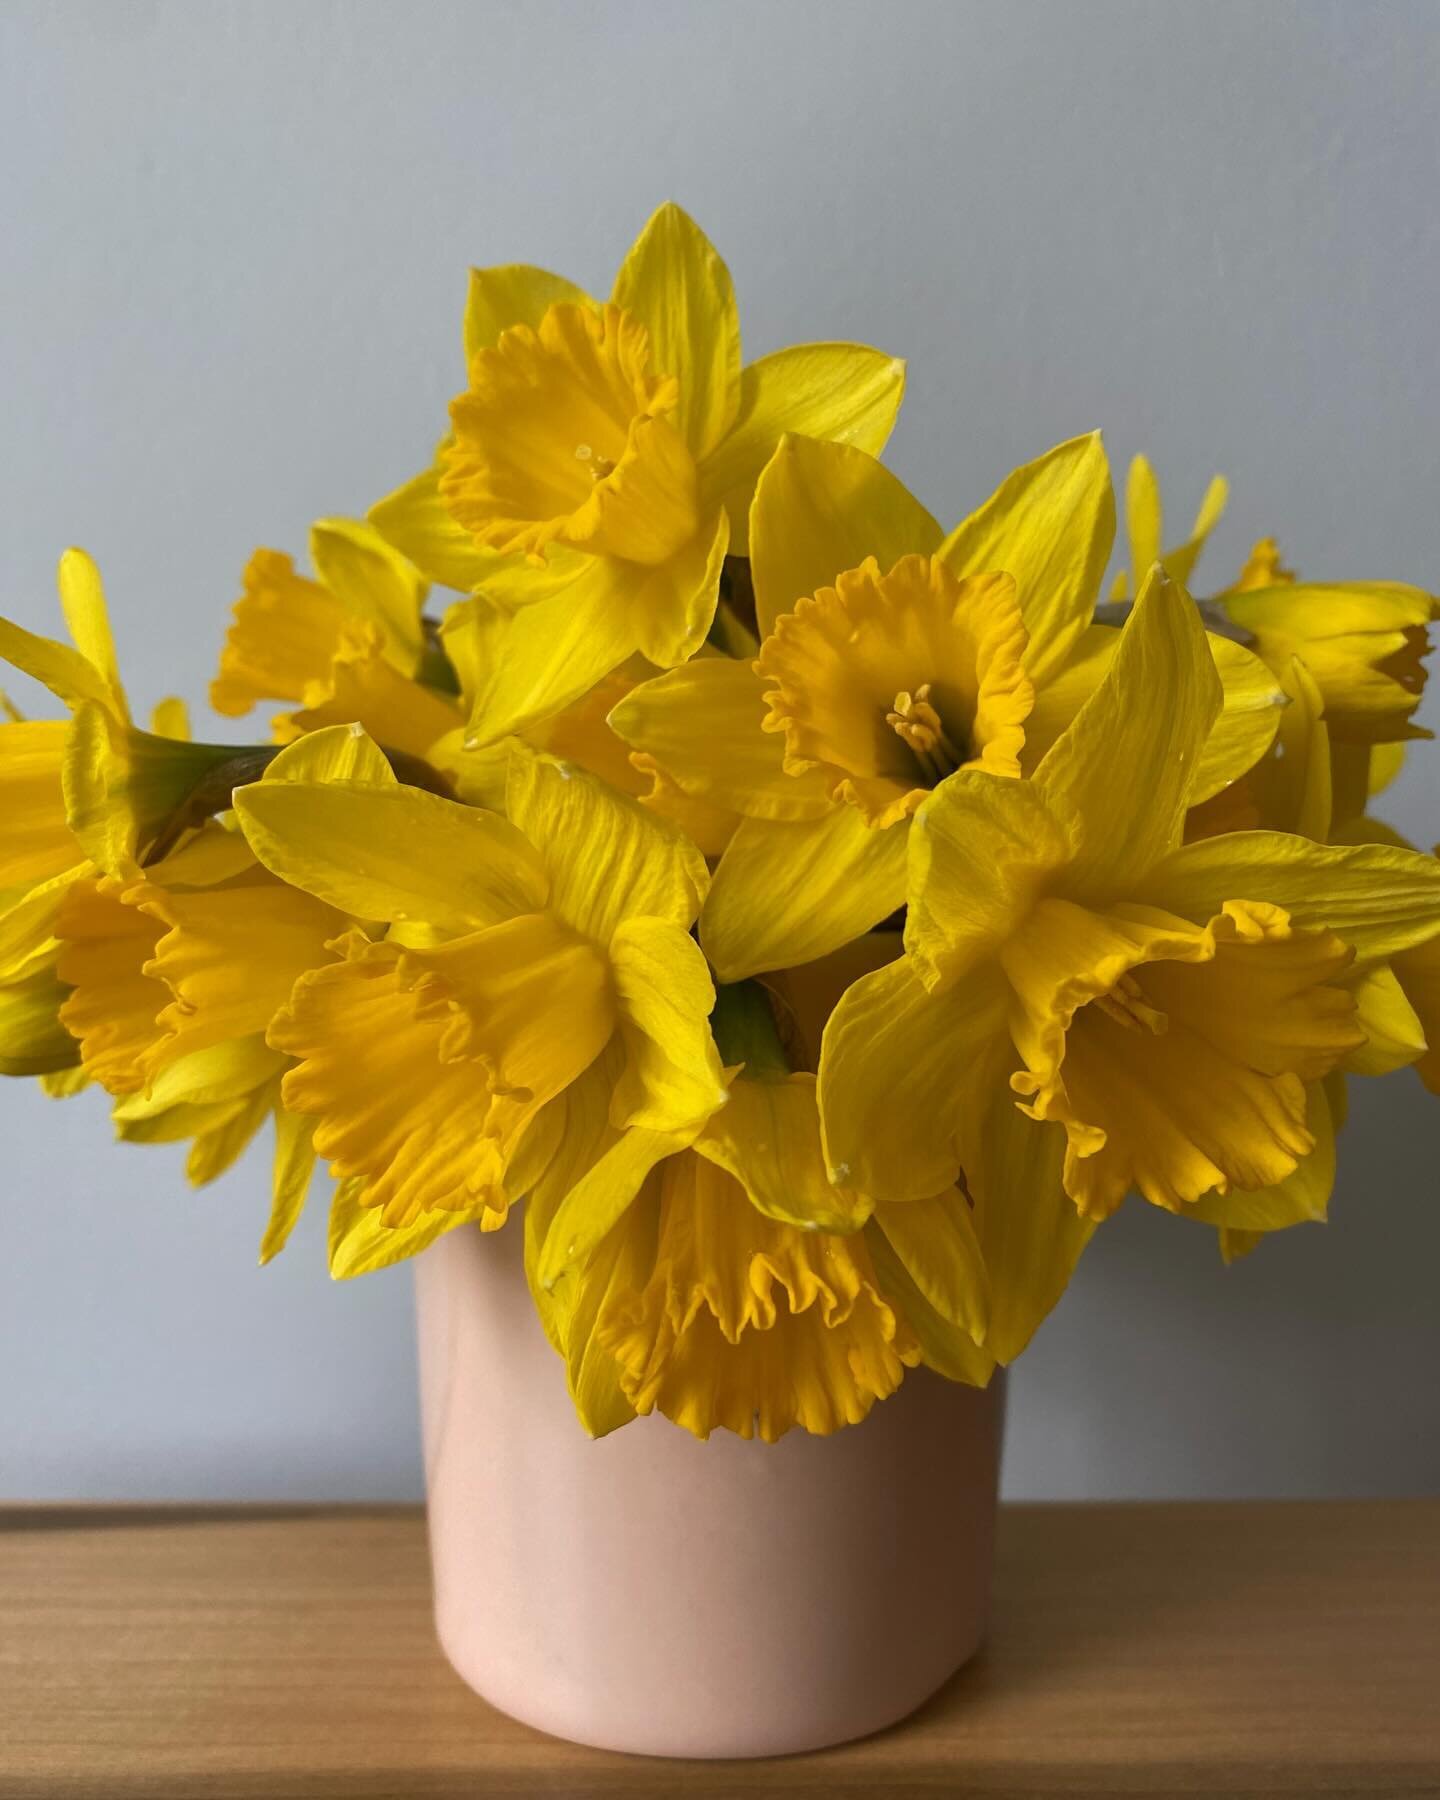 daffodils from the garden. saved before the freezing snow comes tomorrow. 💛⭐️🌝🌼🐥🌕